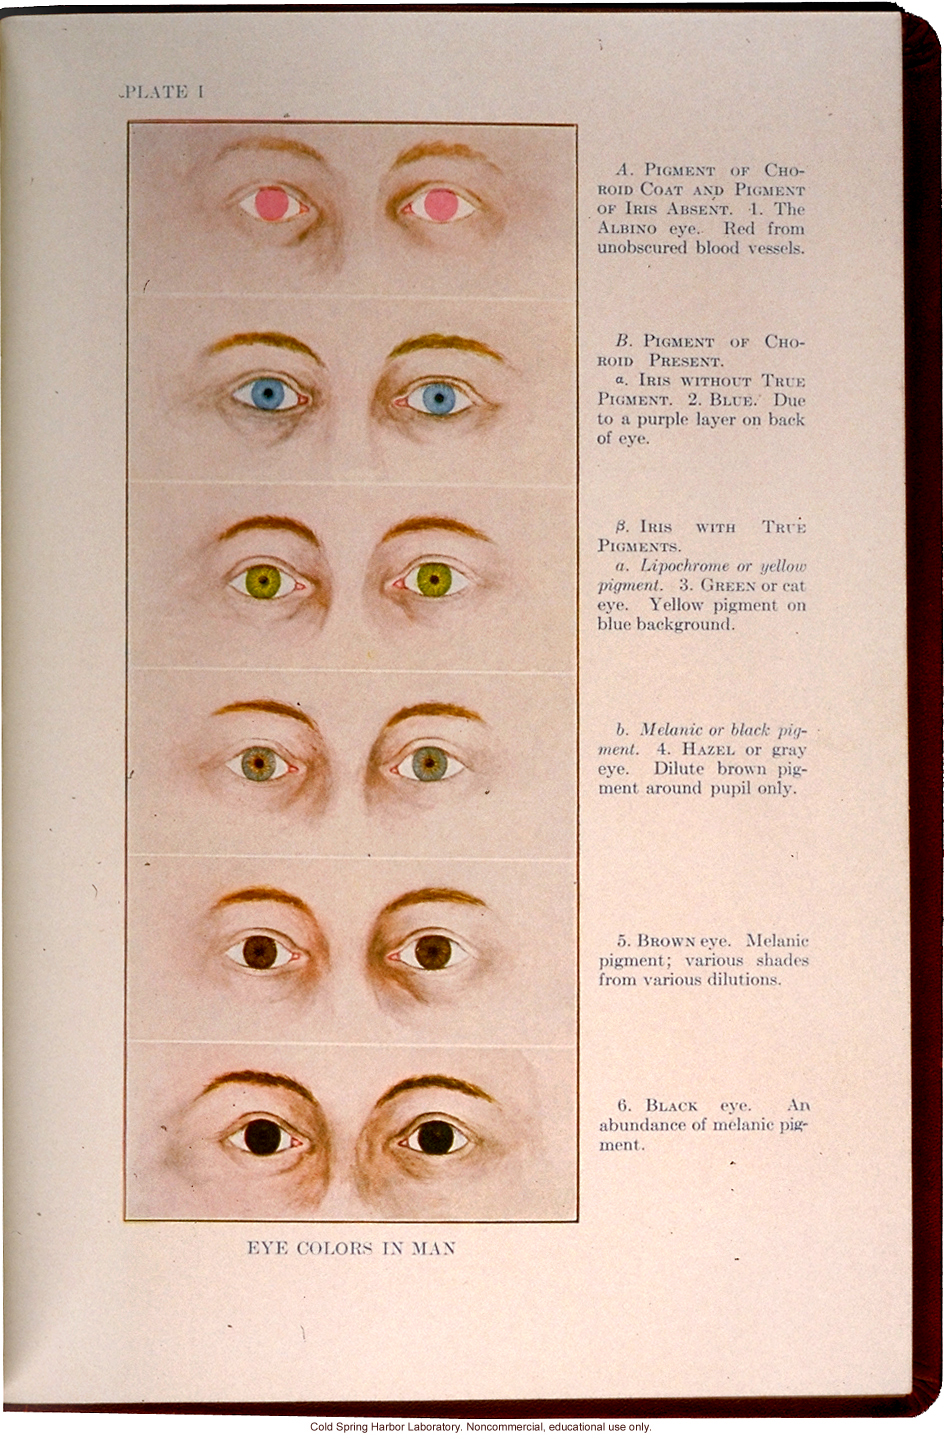 &quote;Eye Colors in Man,&quote; from The Trait Book, ERO Bulliten No. 6, by Charles B. Davenport